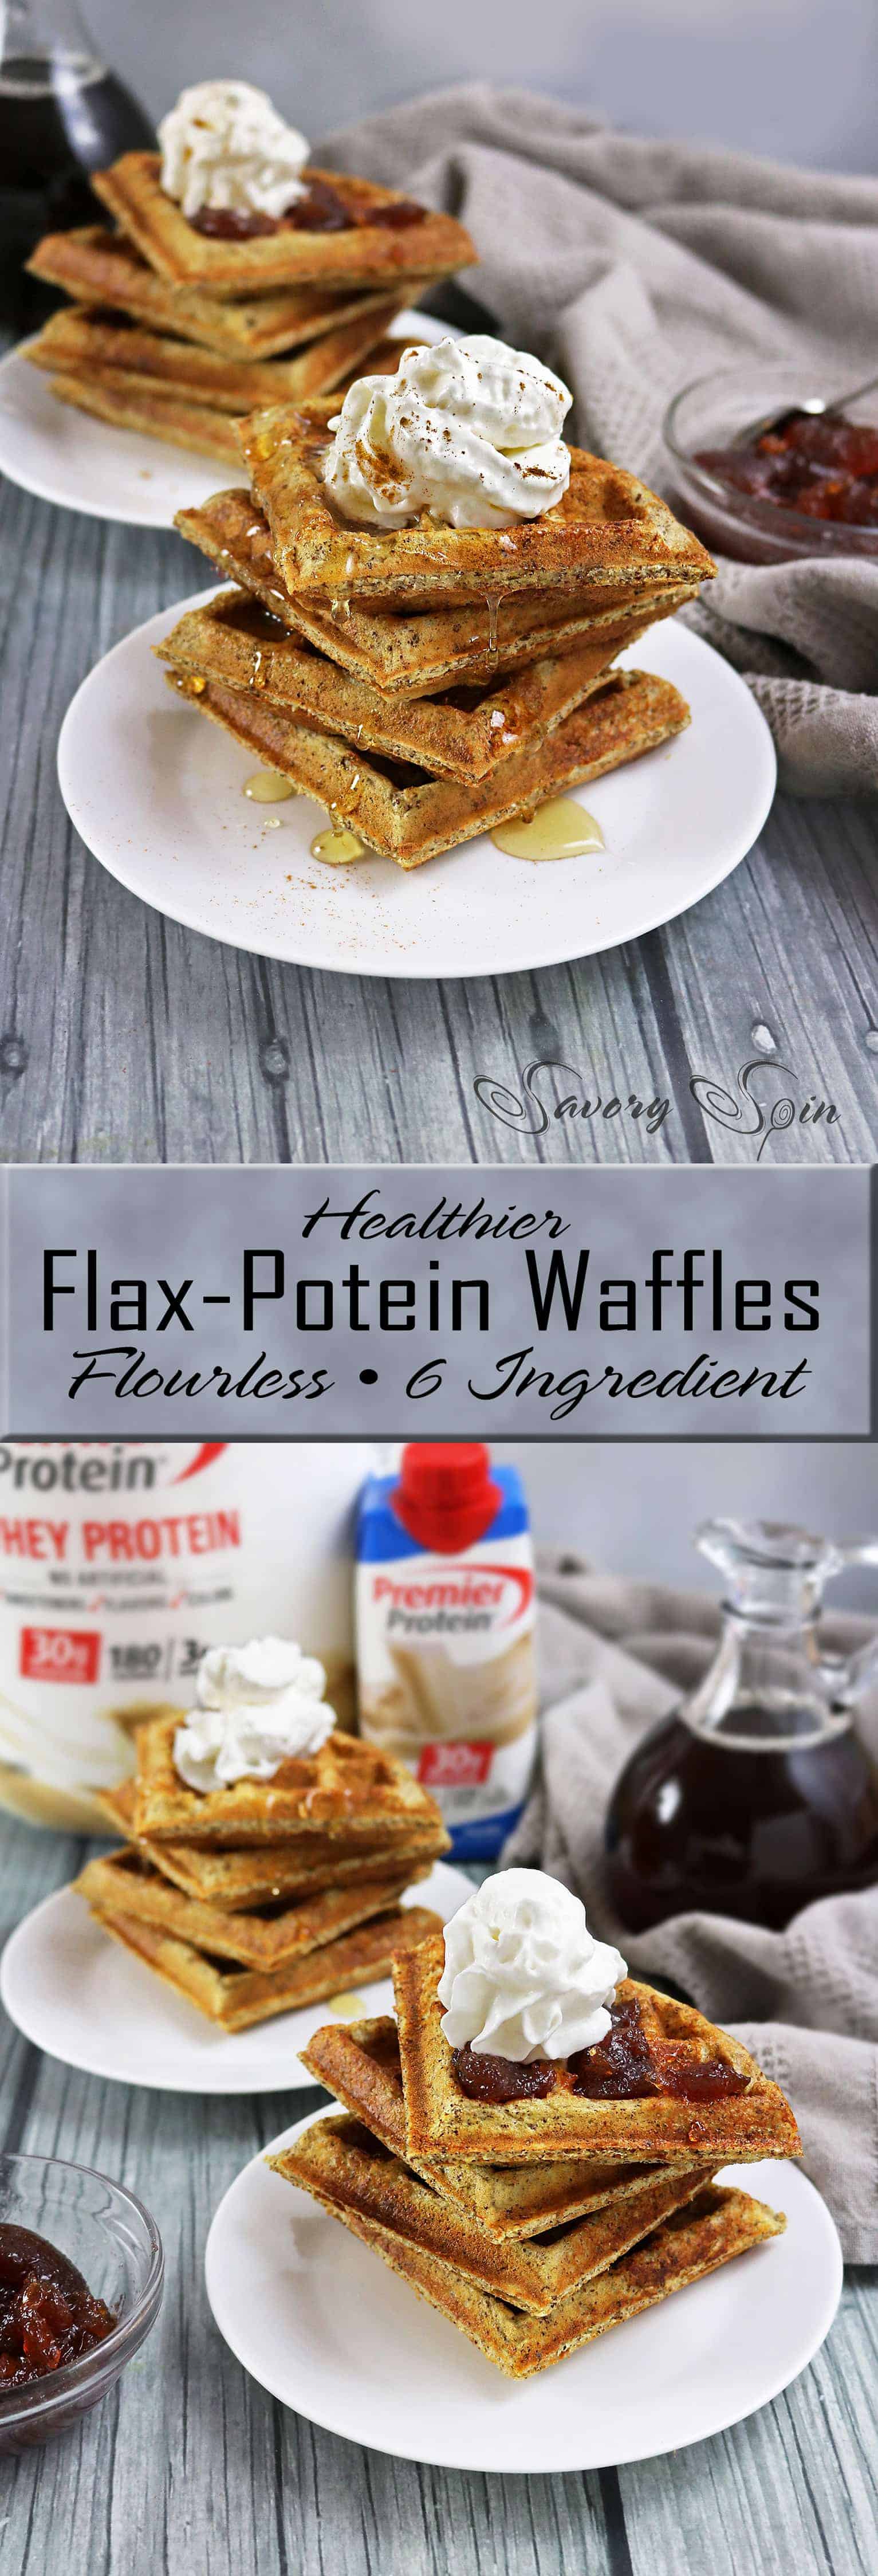 Flax Protein Waffles #TheDayIsYours #Sponsored